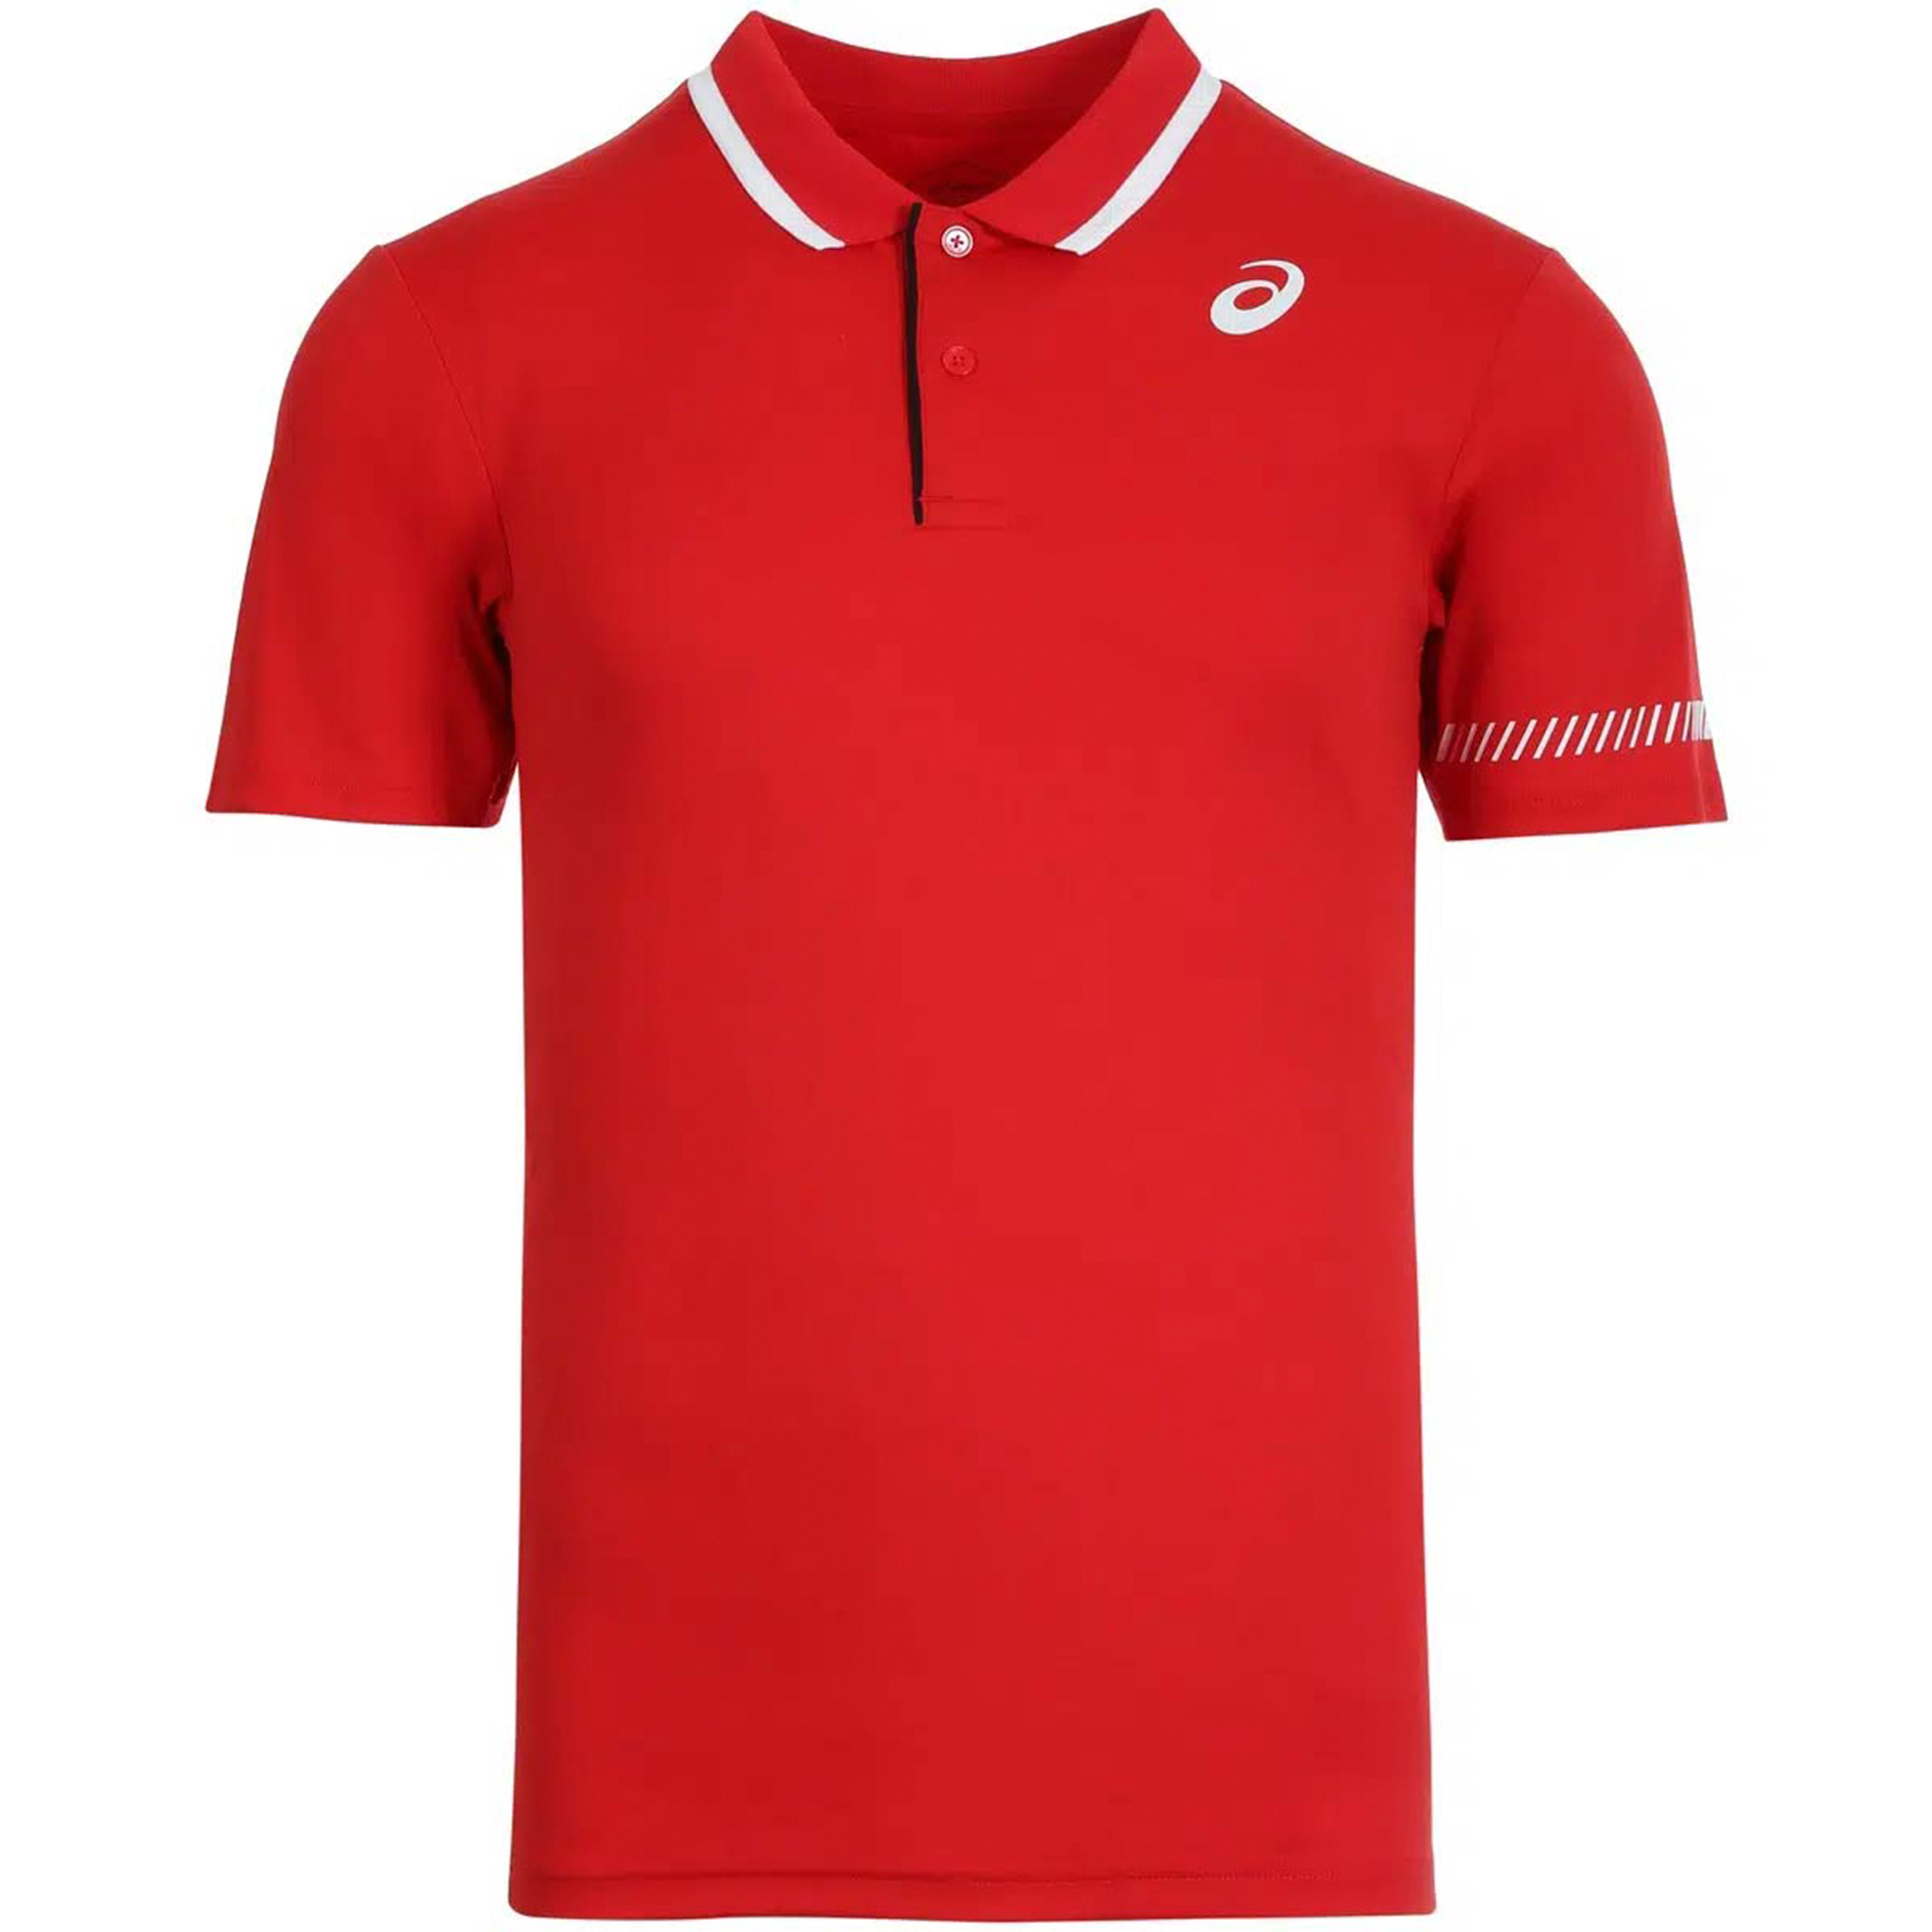 Asics court polo mens - classic red